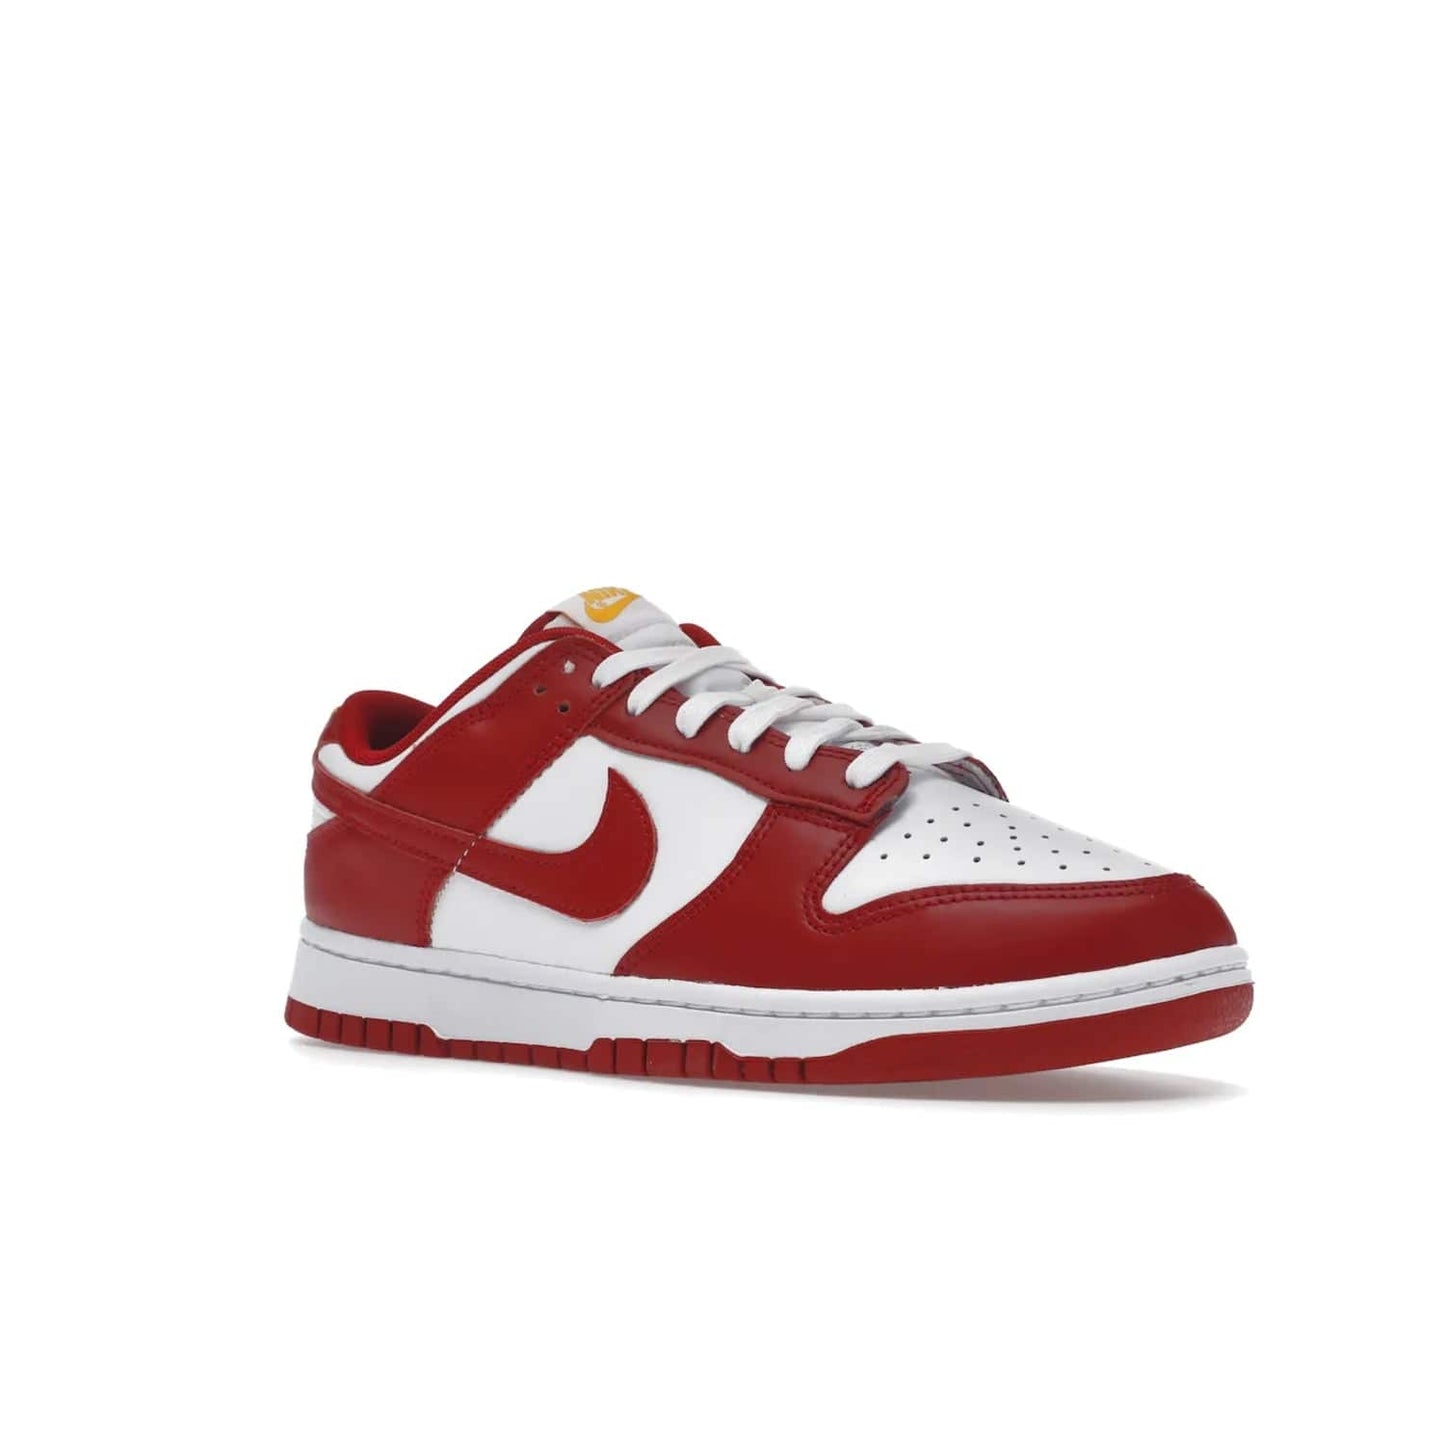 Nike Dunk Low USC - Image 5 - Only at www.BallersClubKickz.com - The Nike Dunk Low USC DD1391-602 colorway captures the eye of University of Southern California fans. Crafted with leather and rubber upper and outsole, this stylish sneaker features a white, gym red, and yellow colorway. With yellow Nike branding, white perforated vamp, and red suede Swoosh, this sneaker turns heads. Get the classic Nike Dunk Low USC releasing on November 9th, 2022.